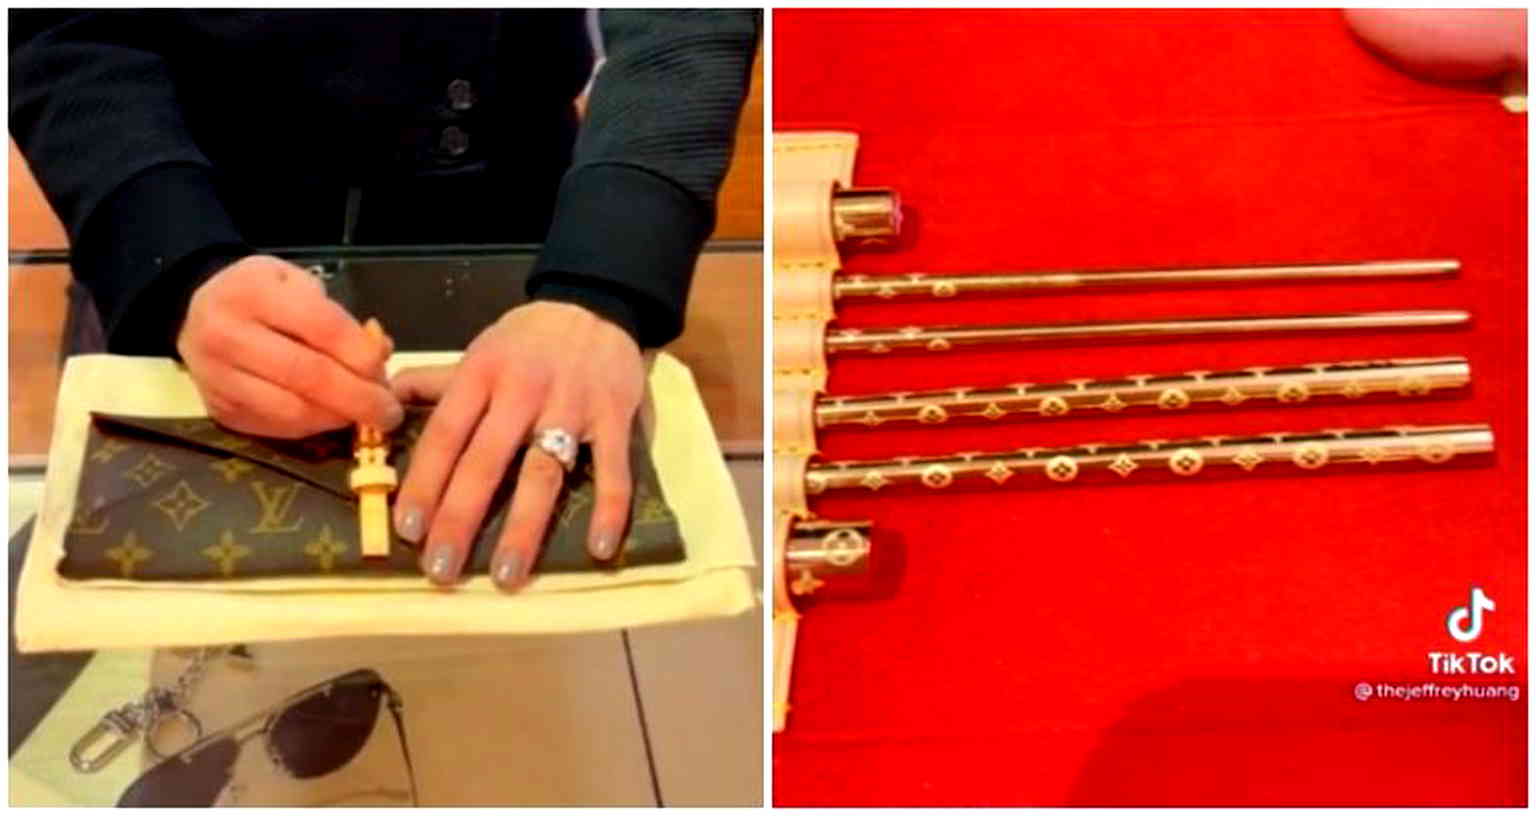 ‘These retail for only $1,640’: TikTok video of Louis Vuitton chopsticks goes viral